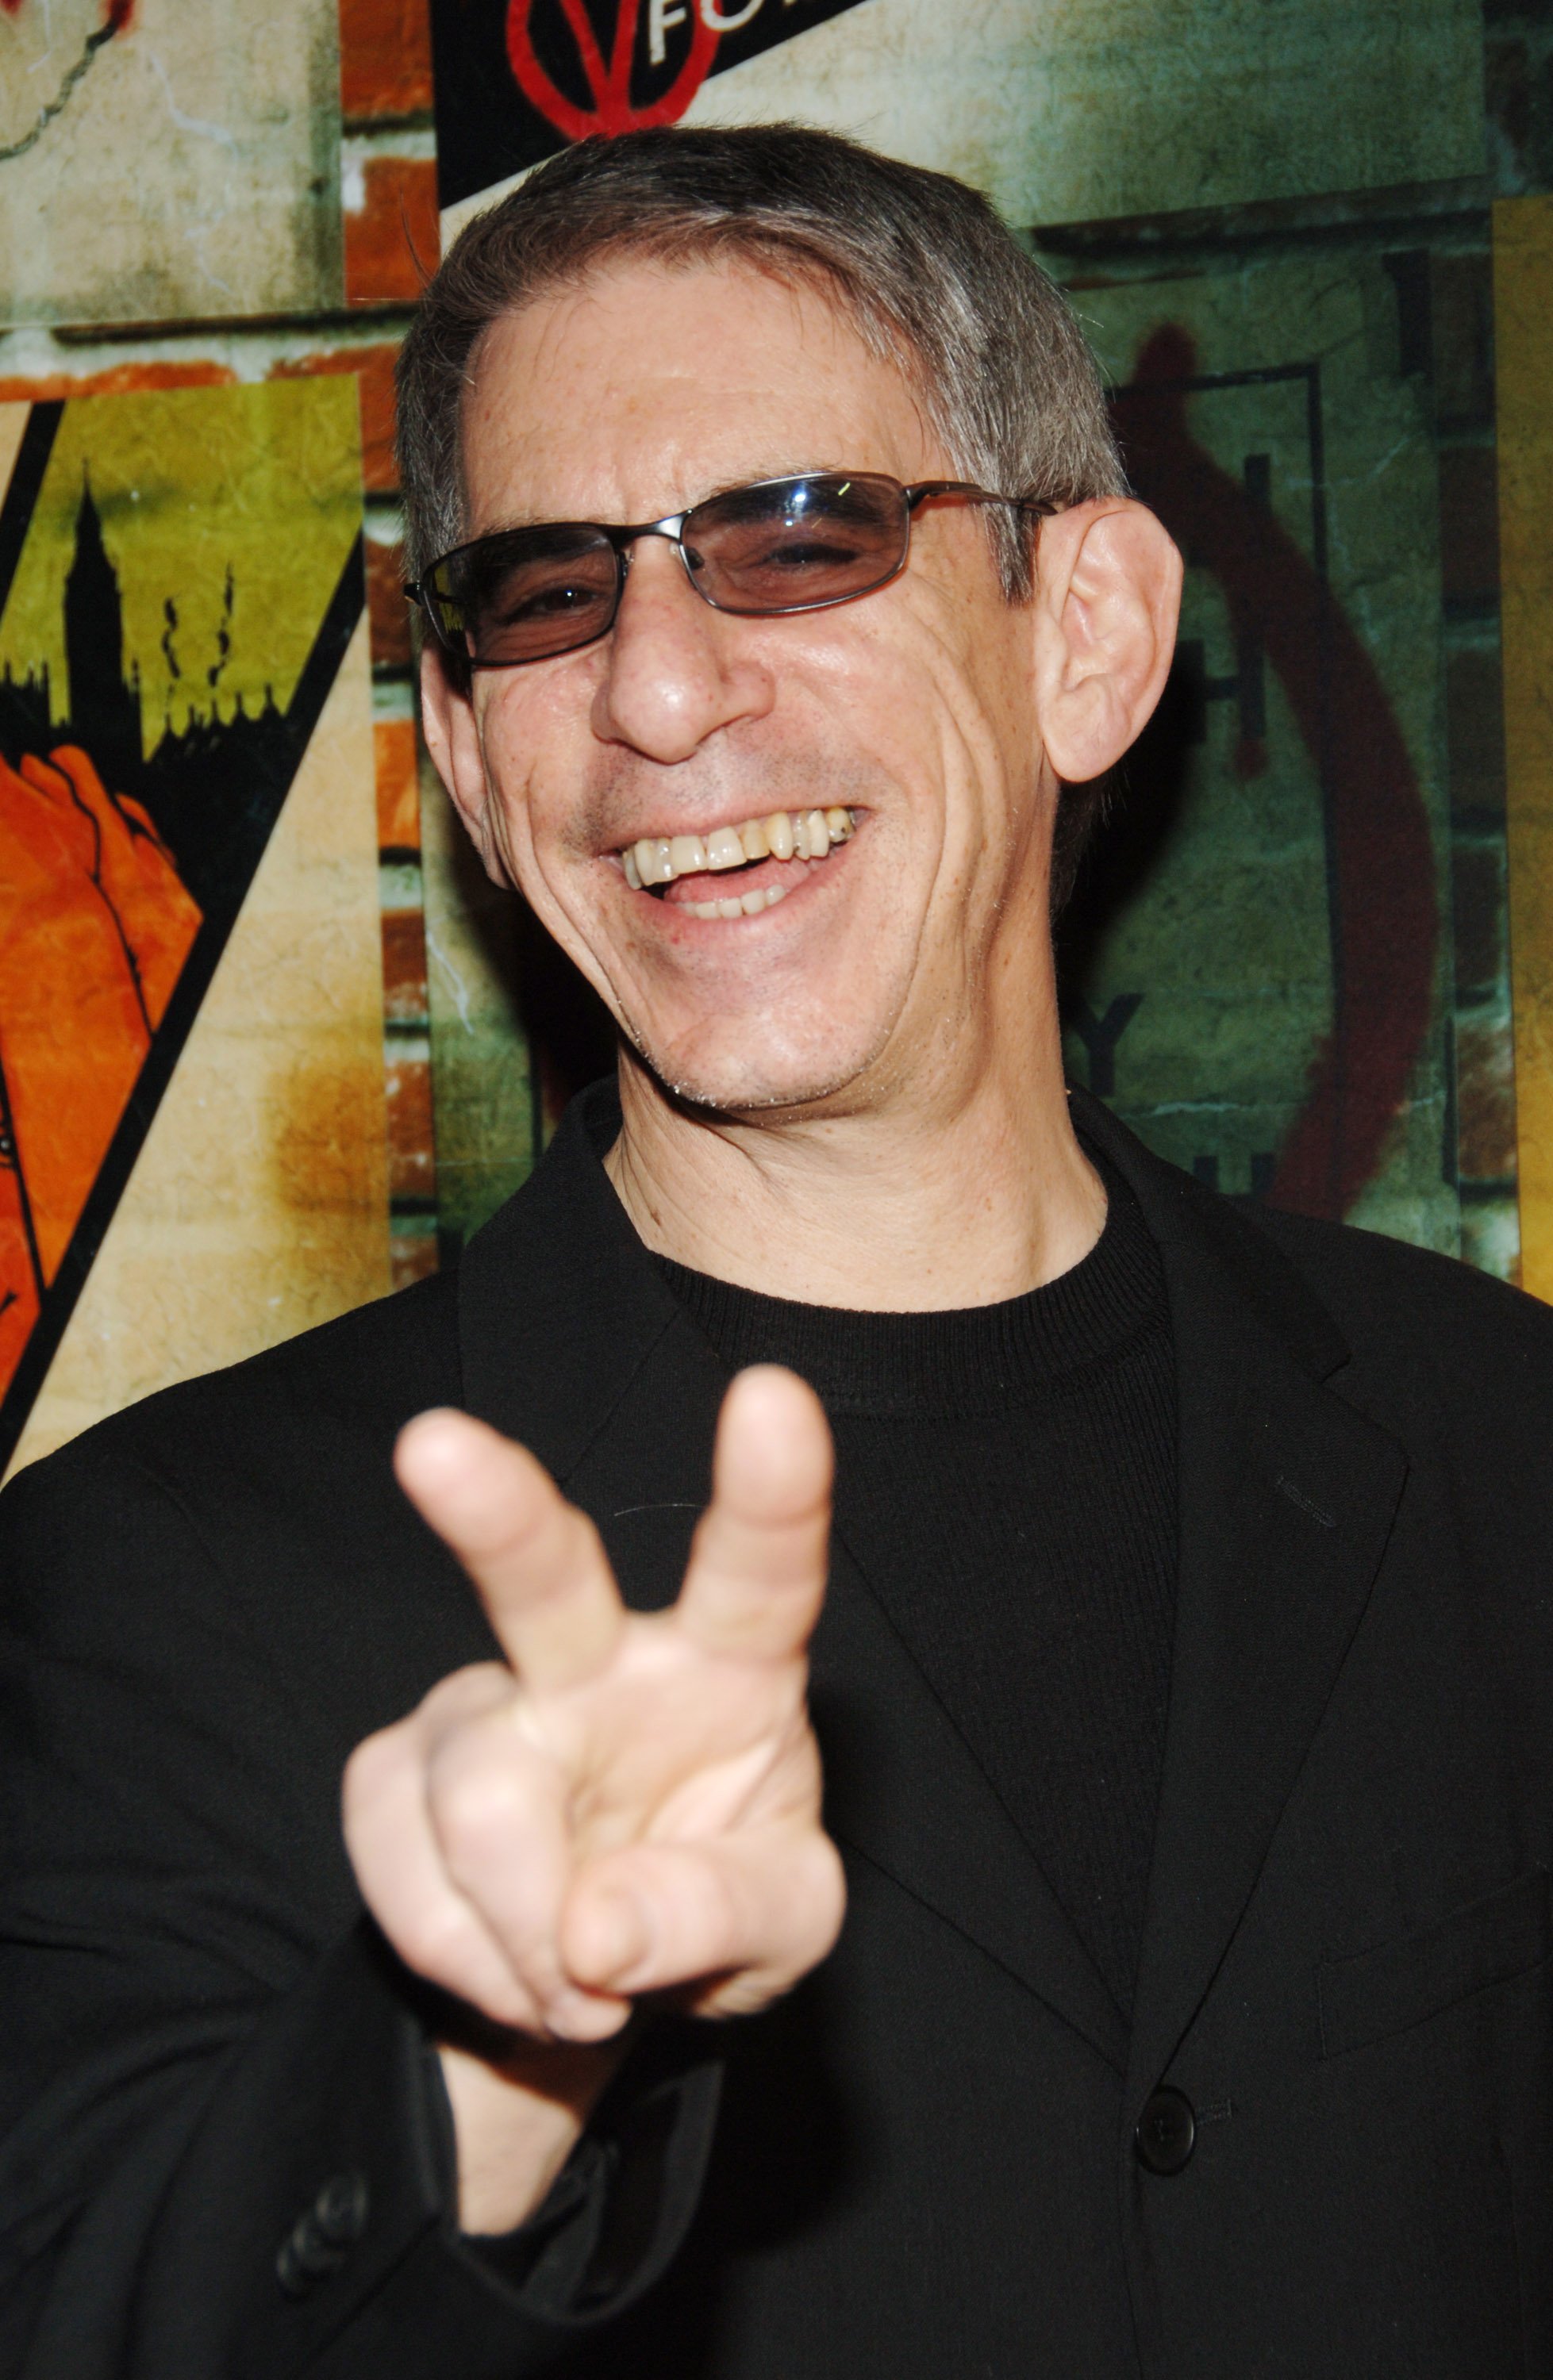 Richard Belzer during the "V For Vendetta" New York City premiere at The Rose Theatre - Frederick P. Rose Hall in New York City, New York. | Source: Getty Images